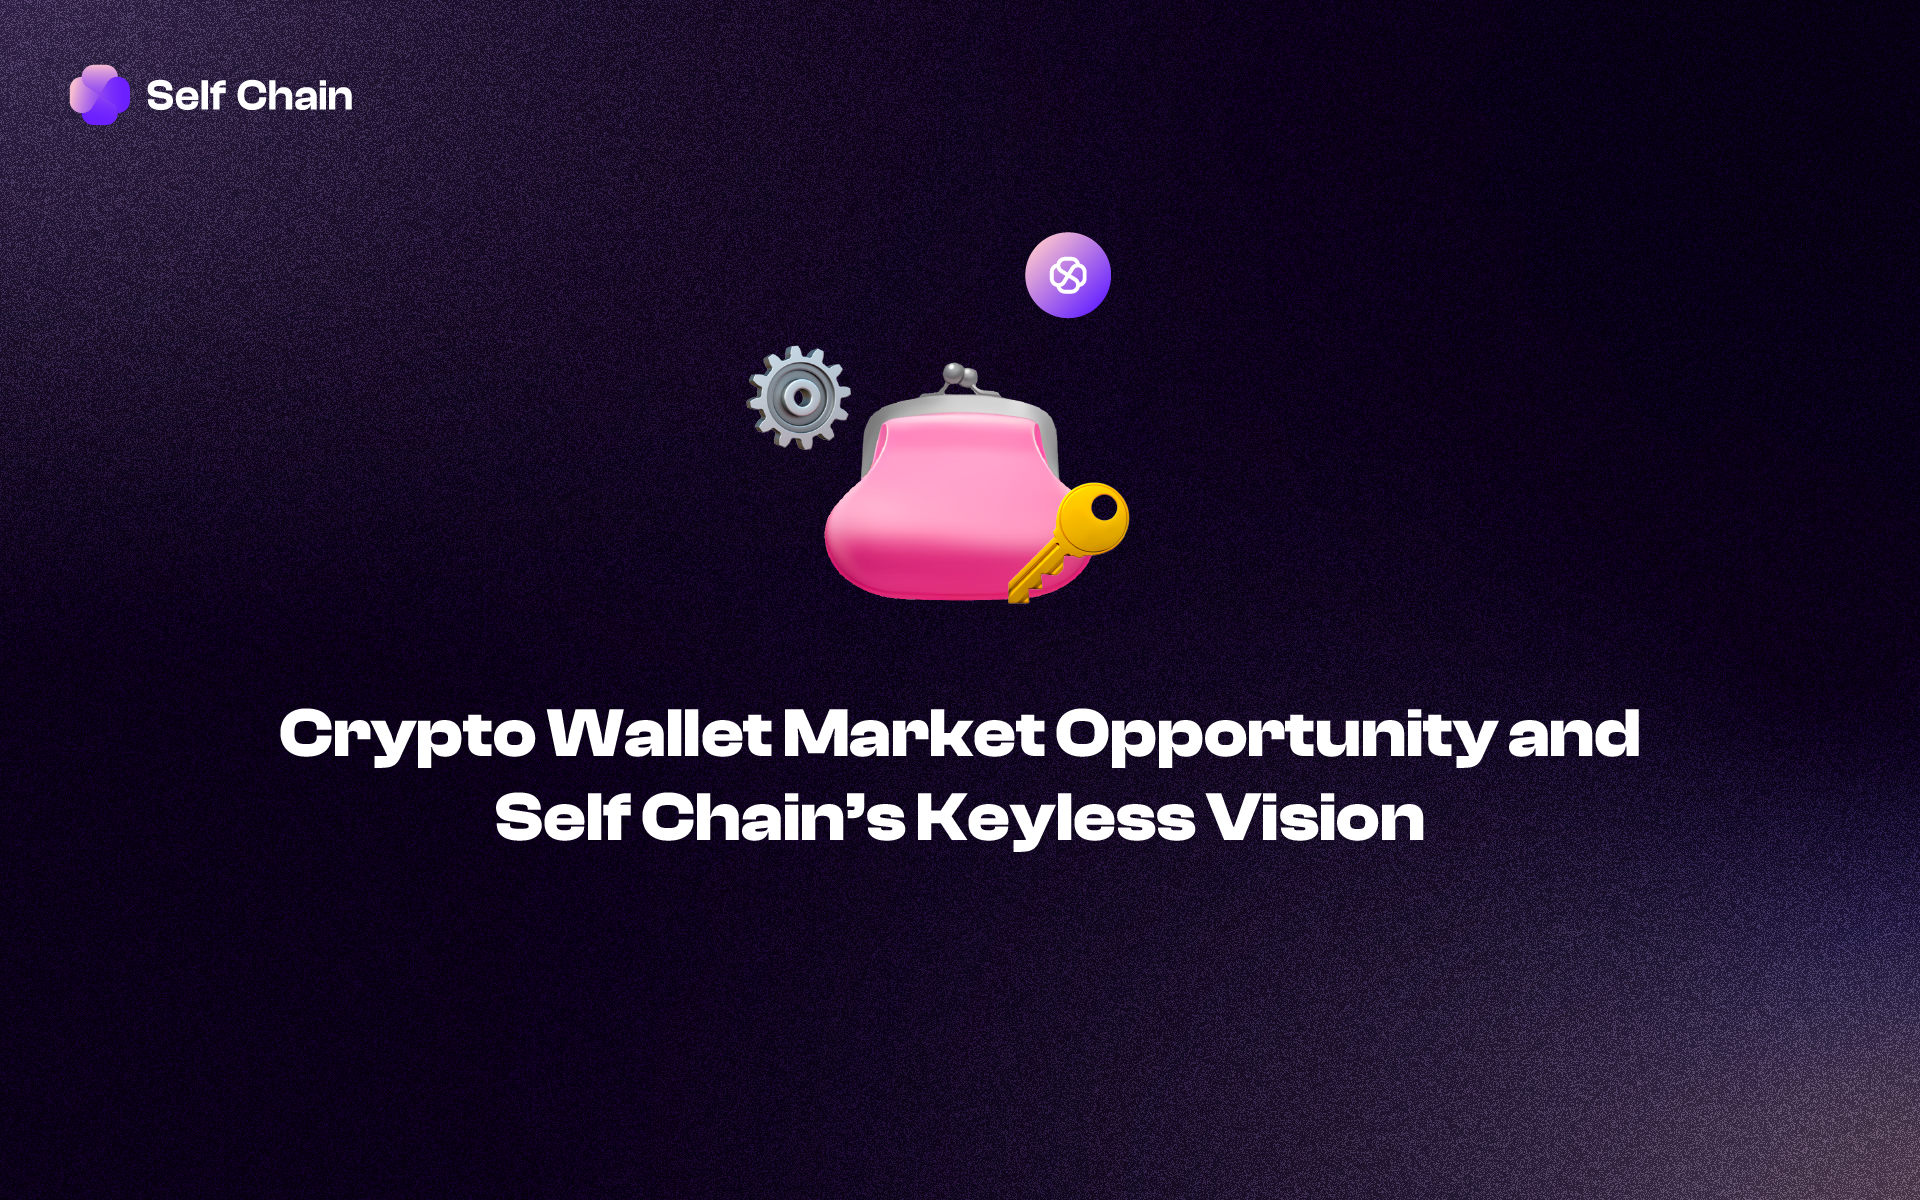 Crypto Wallet Market Opportunity and Self Chain's Keyless Vision